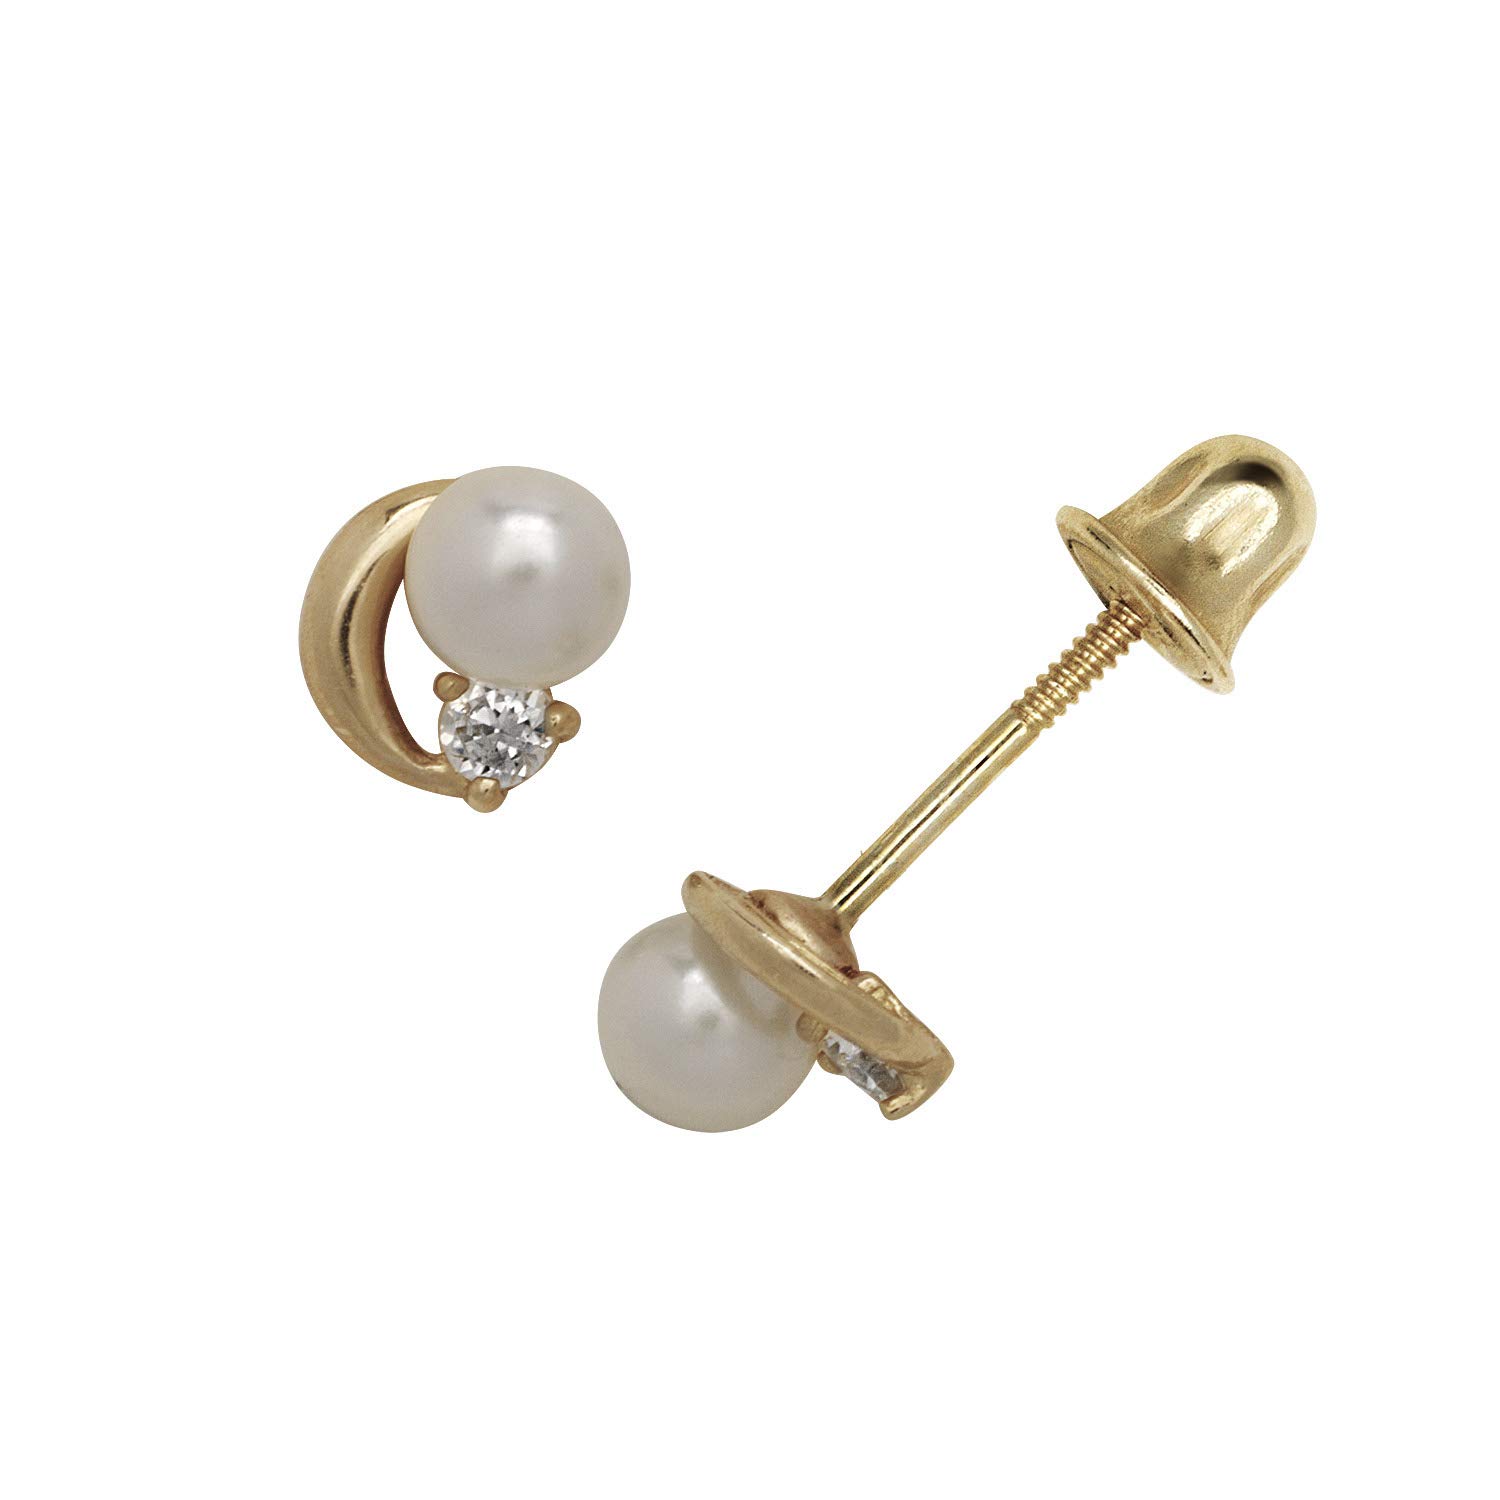 Jewelry Web Solid 14k Yellow Gold Small 5mm Crescent Moon CZ and FW Pearl Screw-back Stud Earrings (3 Color)